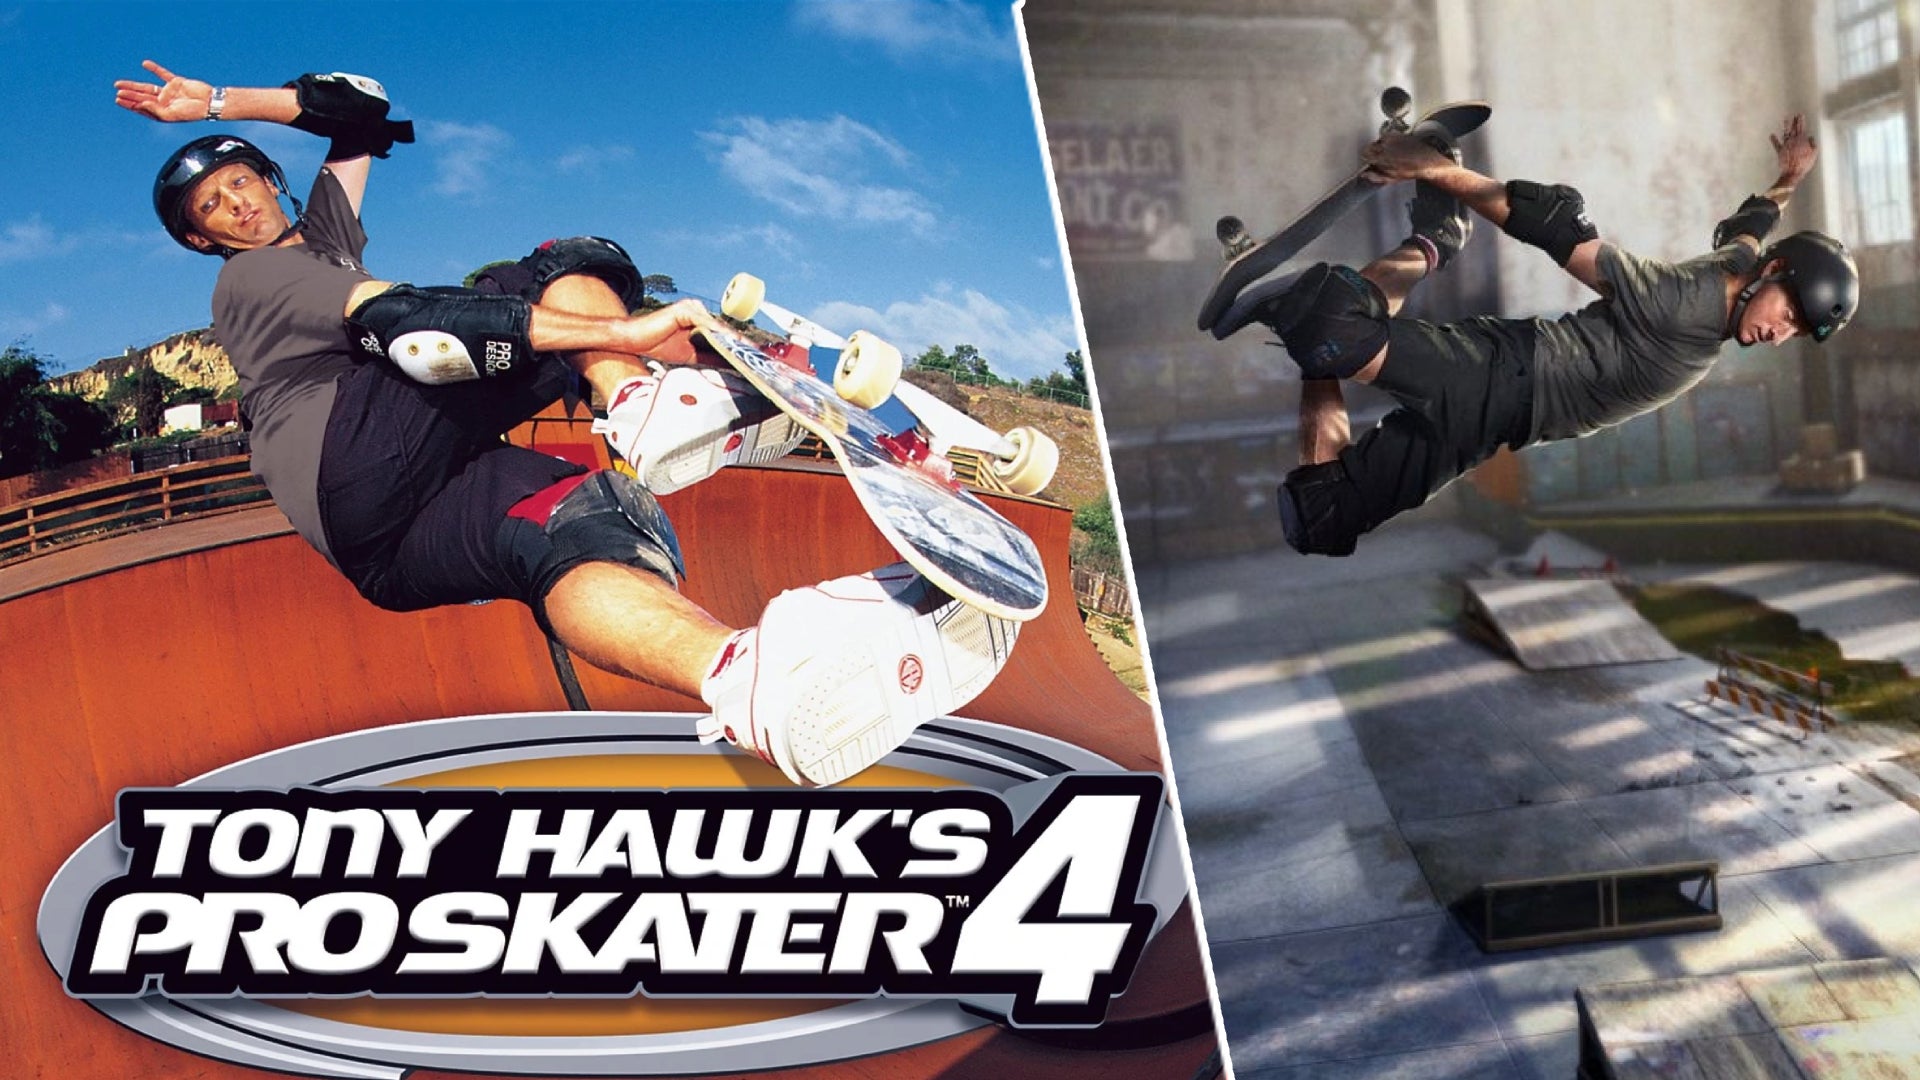 Tony Hawk's Pro Skater 3 + 4 Remasters canned by after Visions merger | VG247